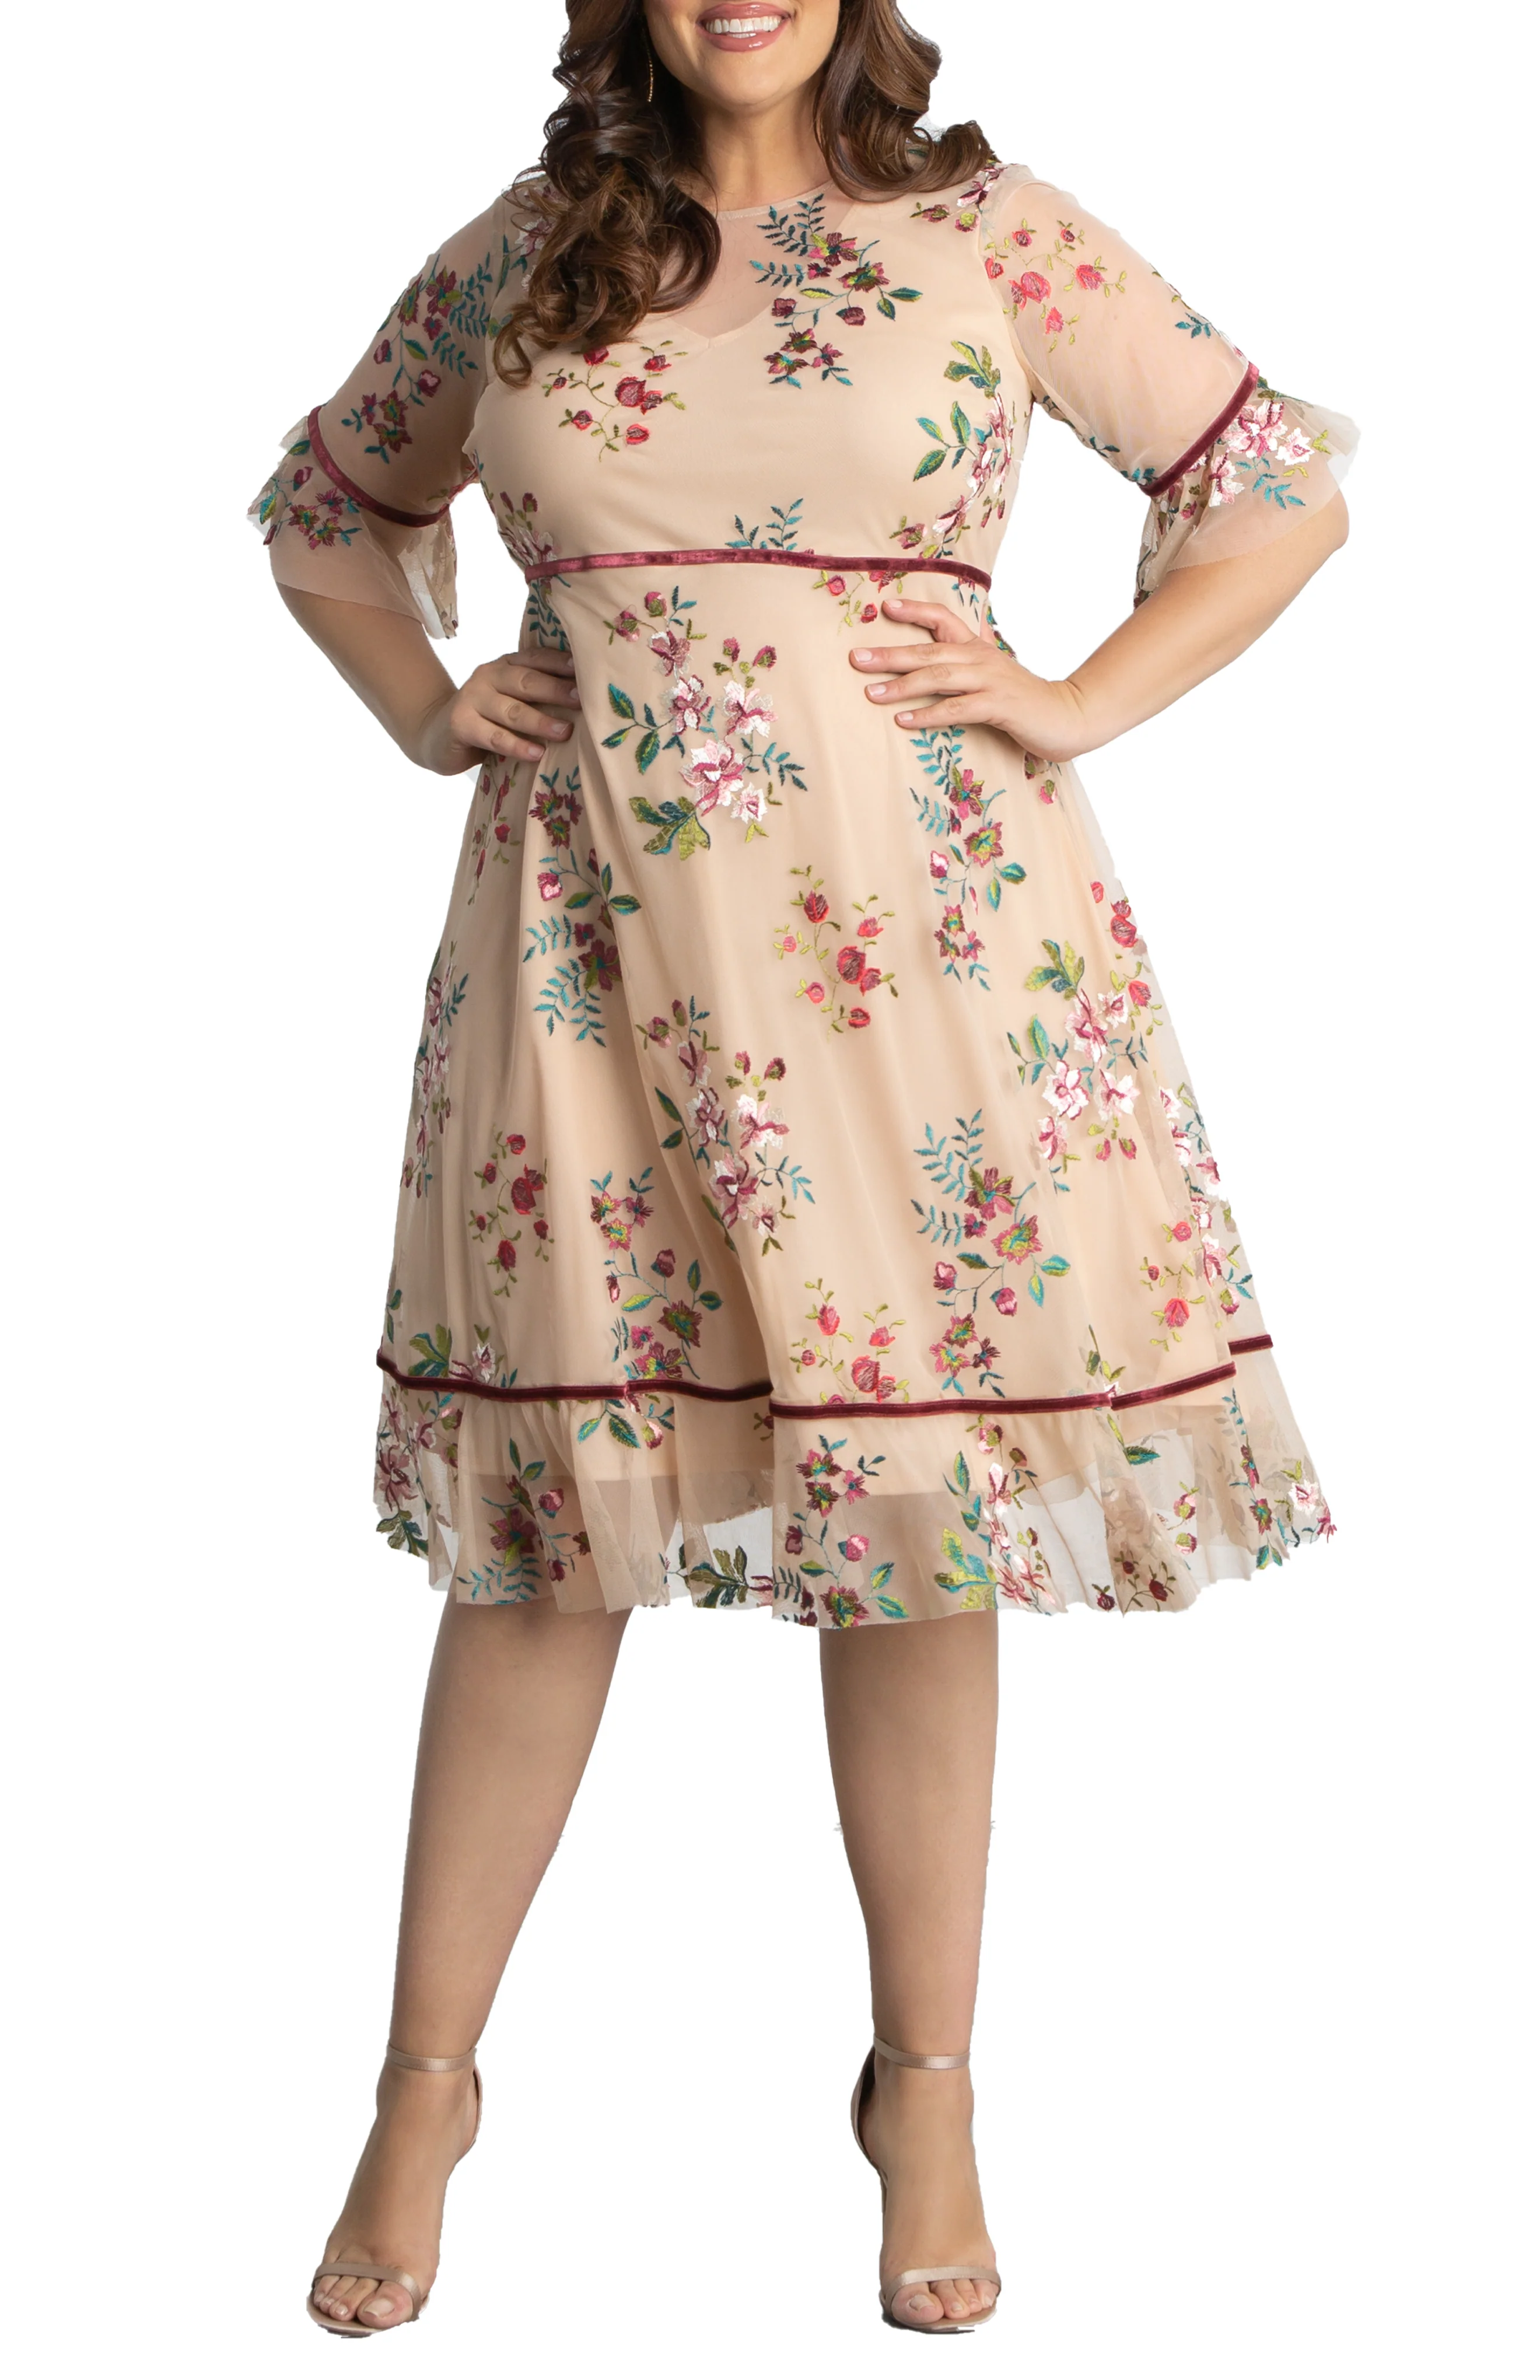 WILDFLOWER EMBROIDERED DRESS - PLUS